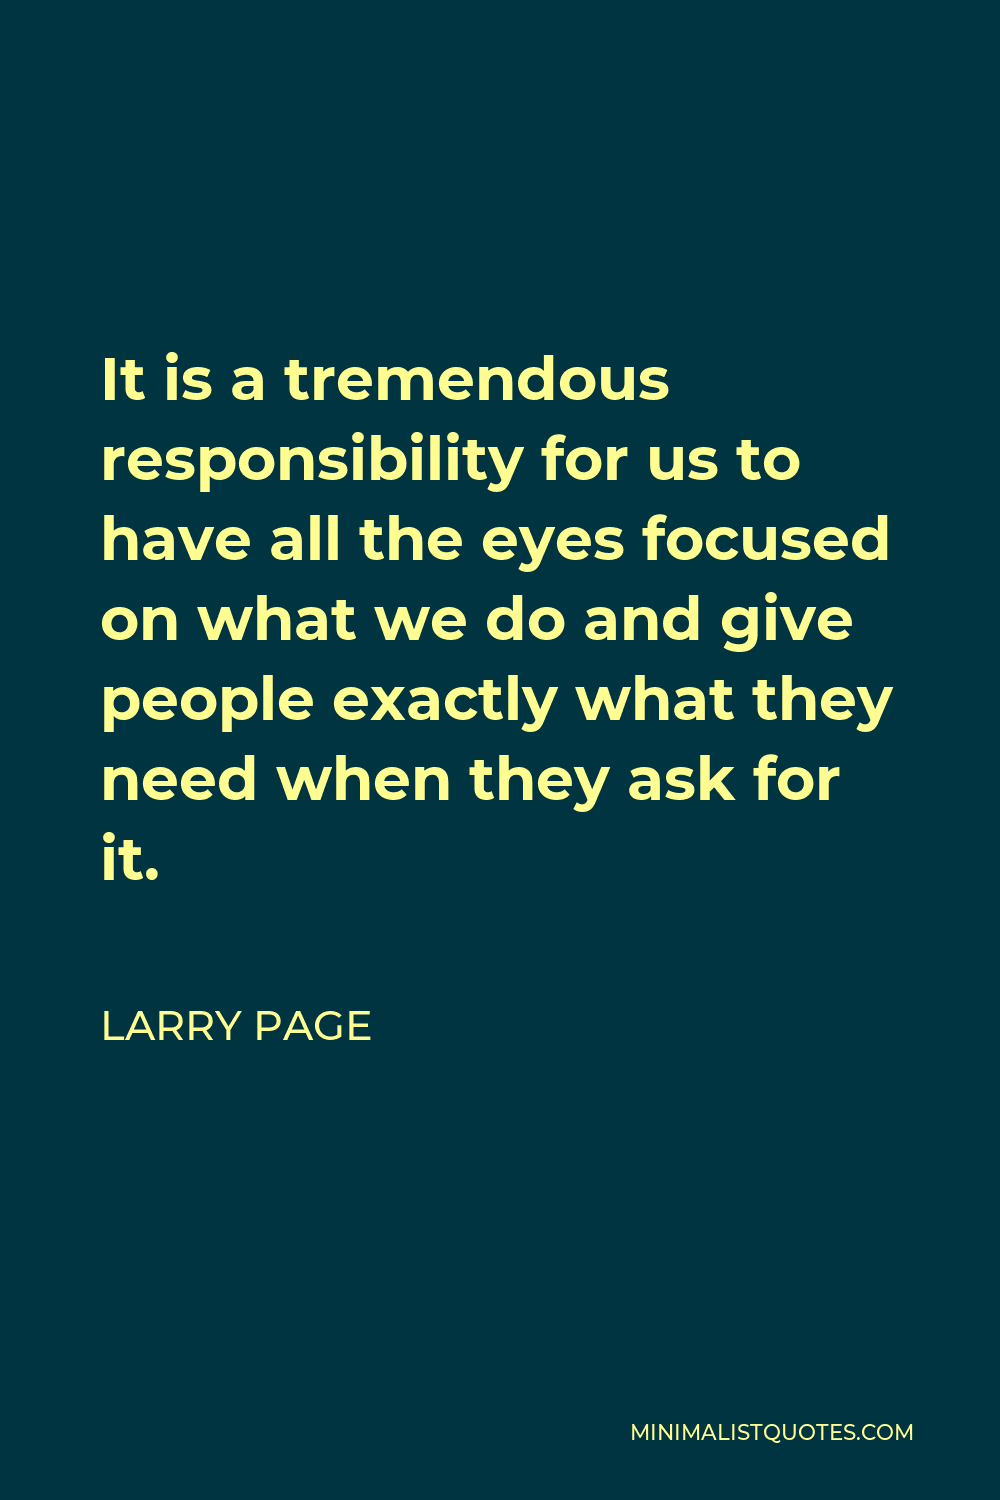 Larry Page Quote - It is a tremendous responsibility for us to have all the eyes focused on what we do and give people exactly what they need when they ask for it.